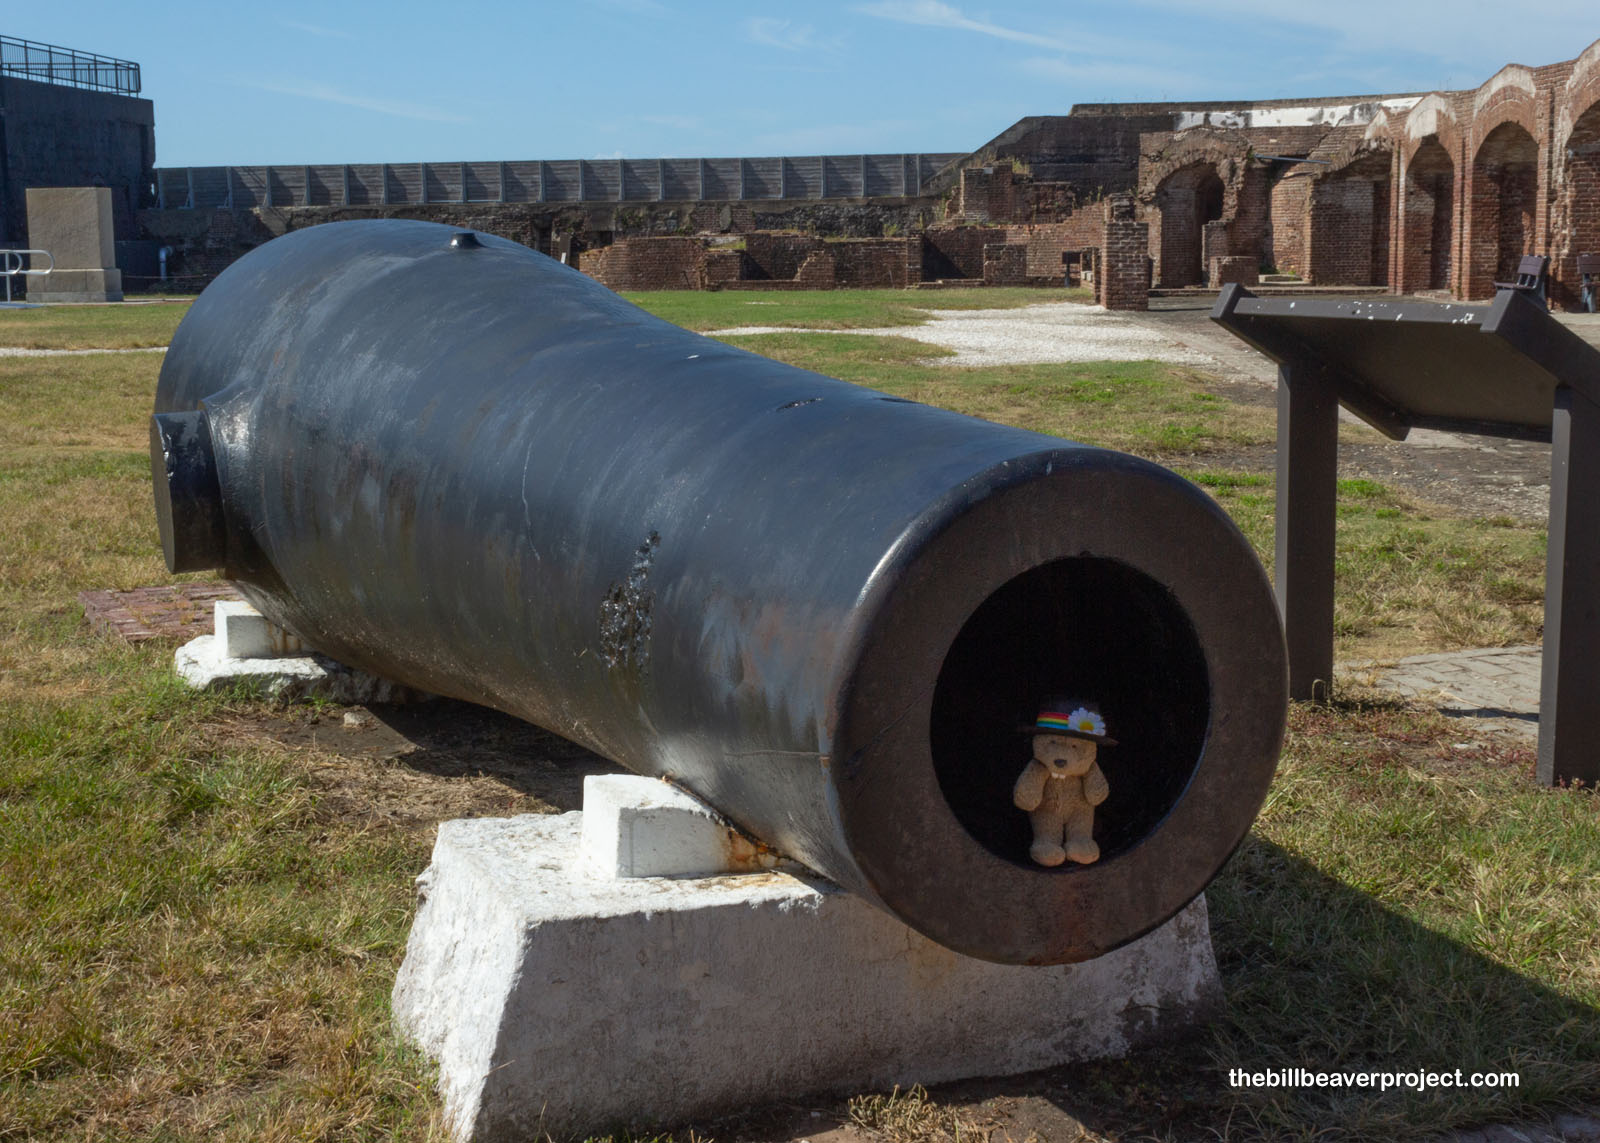 One of the huge cannons on display at Fort Sumter!